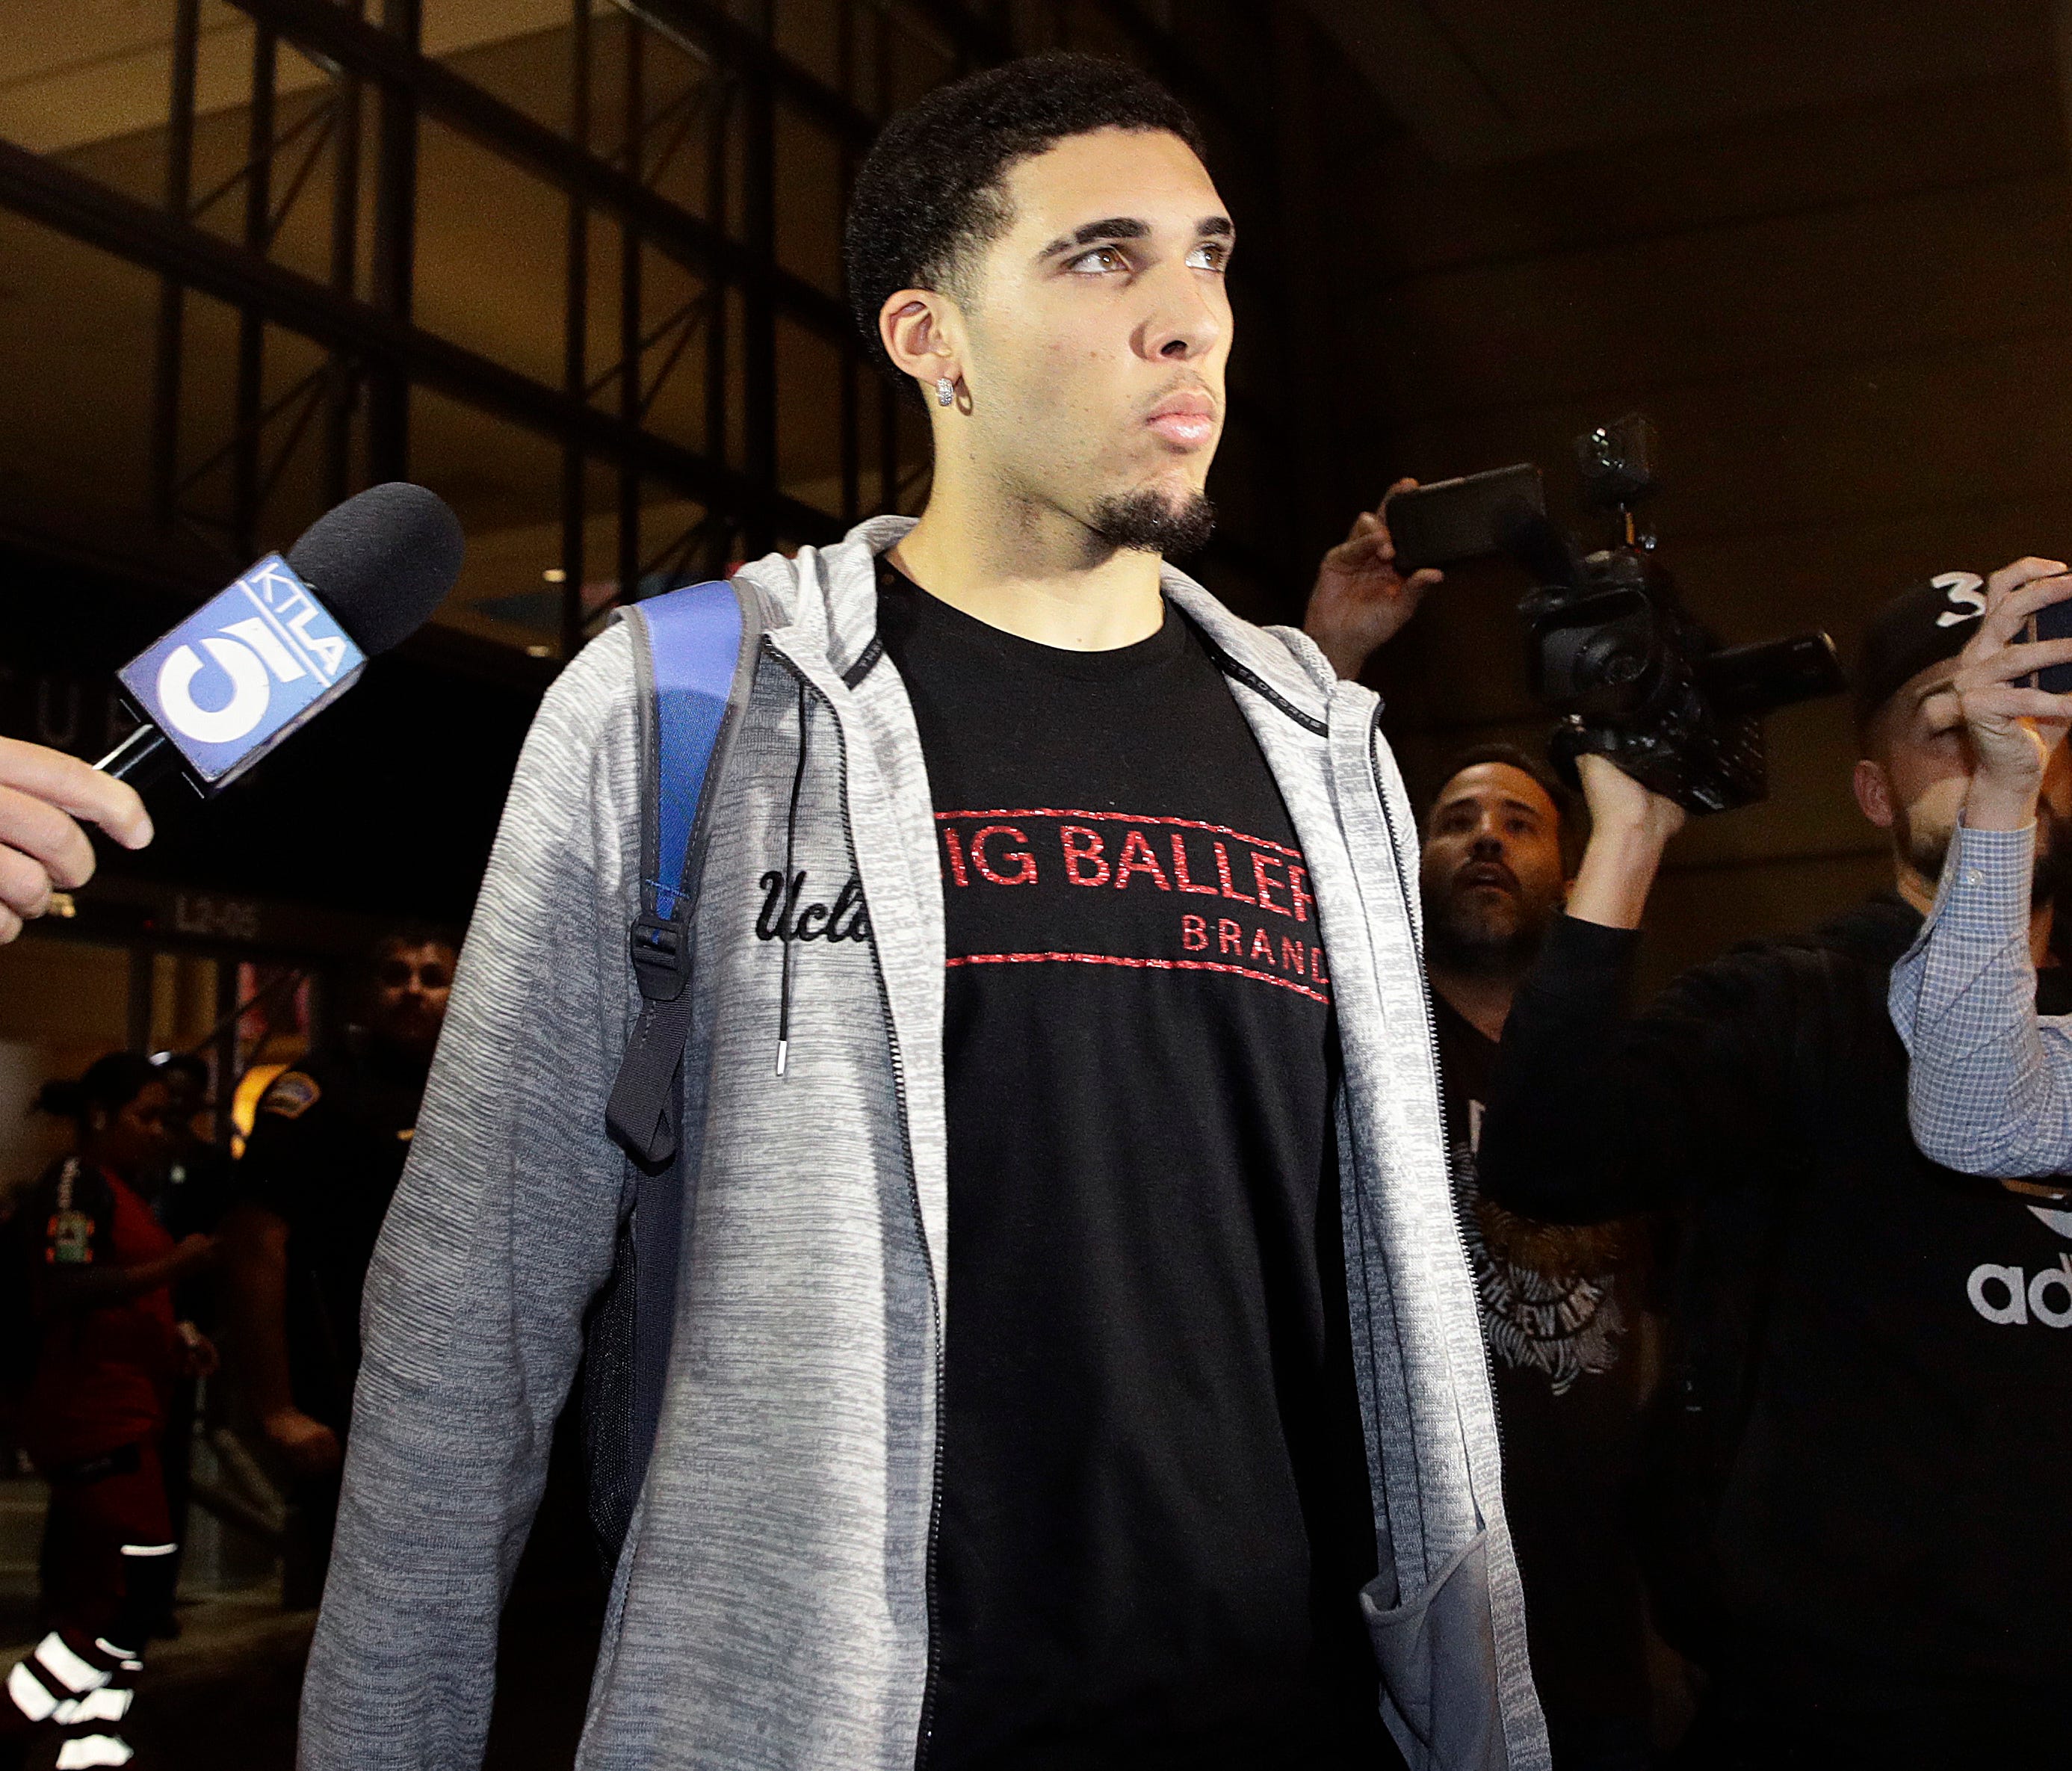 UCLA basketball player LiAngelo Ball is surrounded by reporters and photographers as he leaves Los Angeles International Airport on Tuesday, Nov. 14, 2017, in Los Angeles. Three UCLA basketball players–Ball, Jalen Hill and Cody Riley–detained in Chin